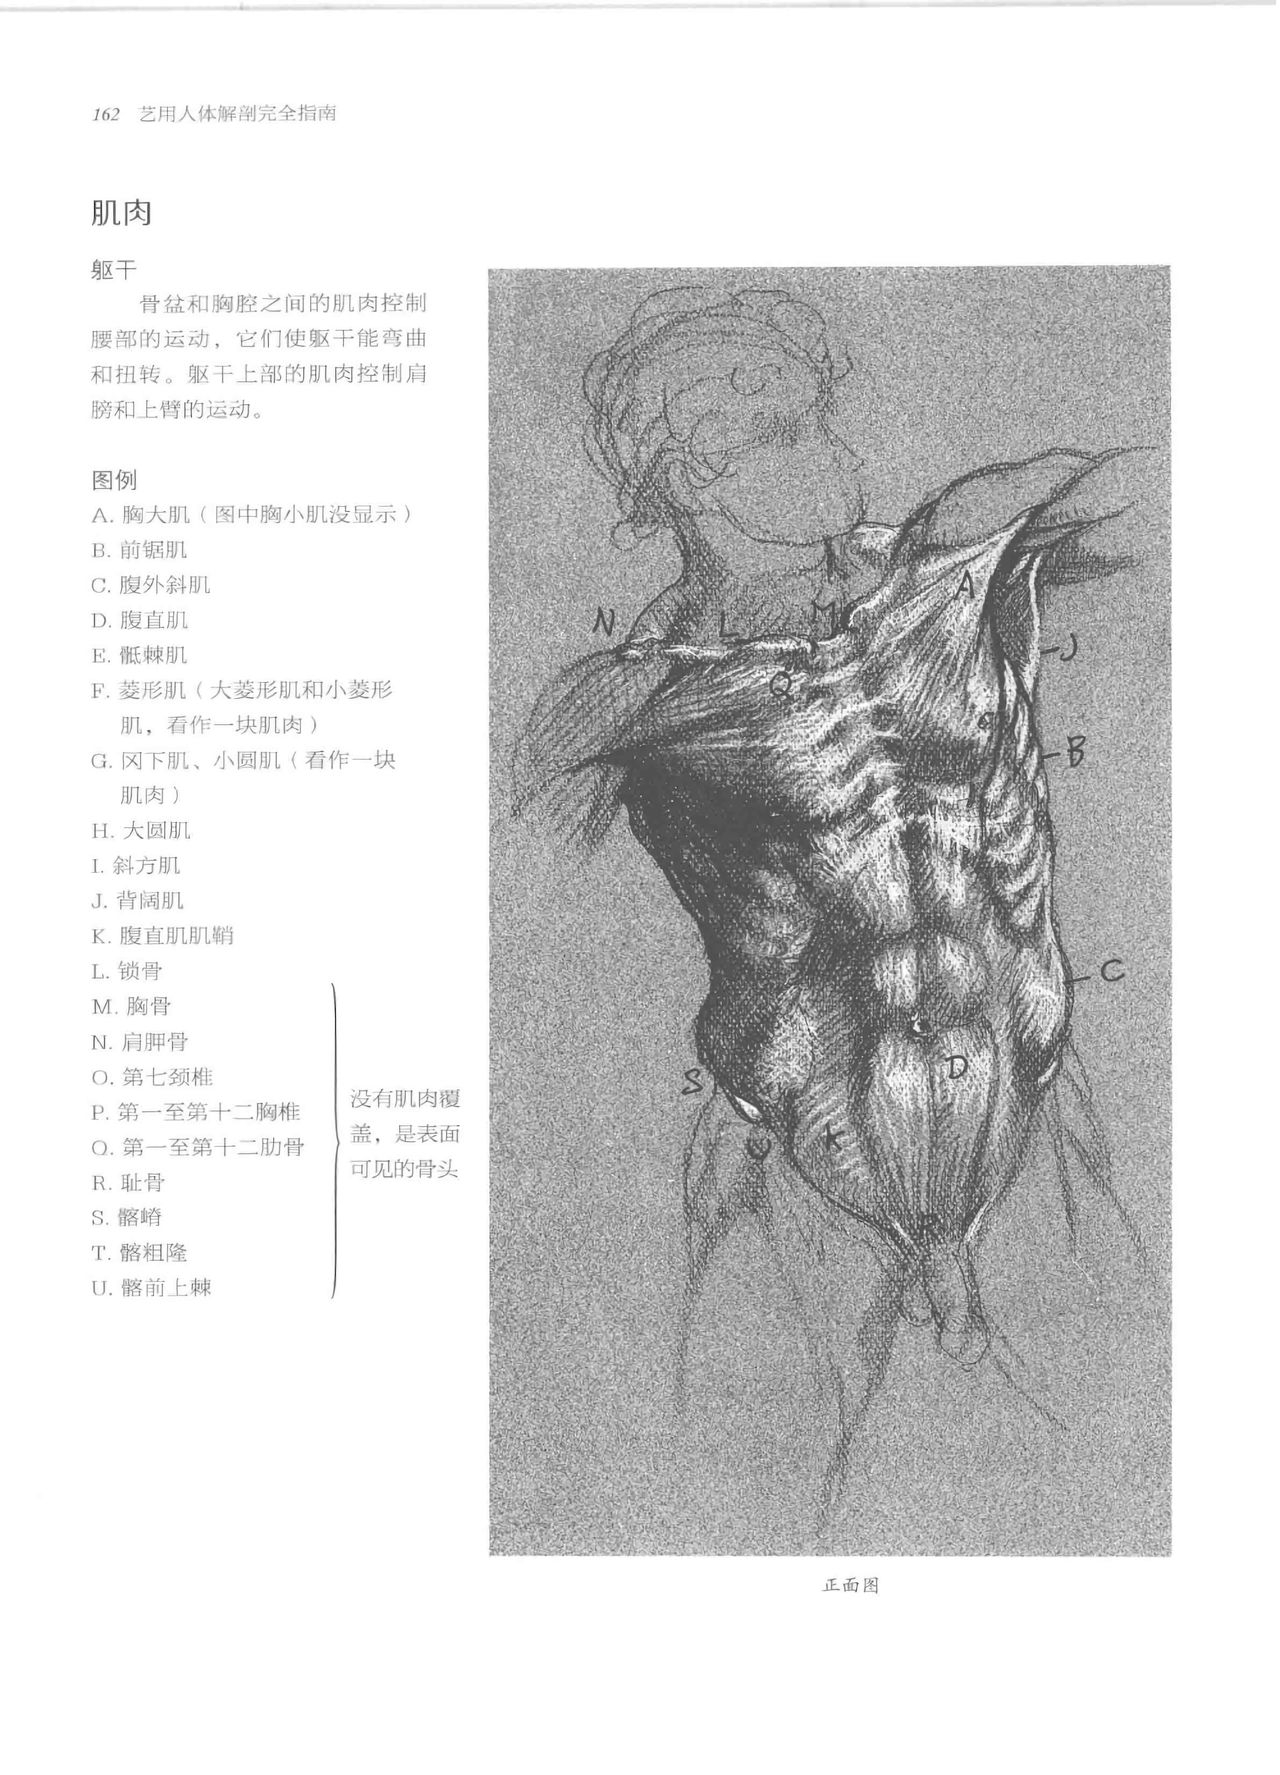 Anatomy-A Complete Guide for Artists - Joseph Sheppard [Chinese] 162